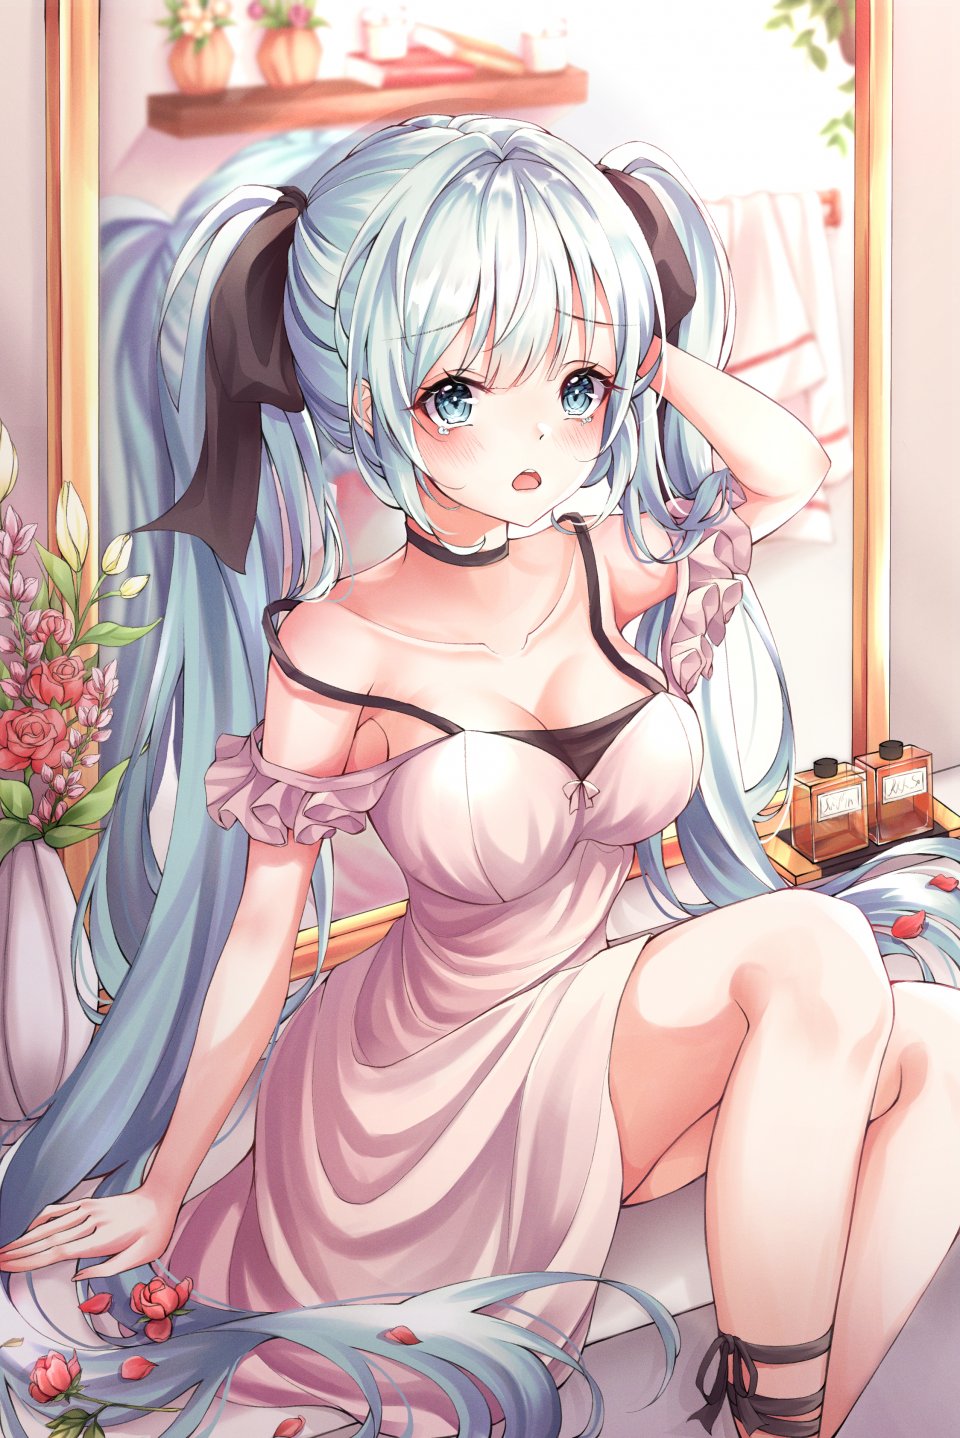 Pippin_Sol 初音ミク VOCALOID Cleavage 连衣裙 掀裙 夏装